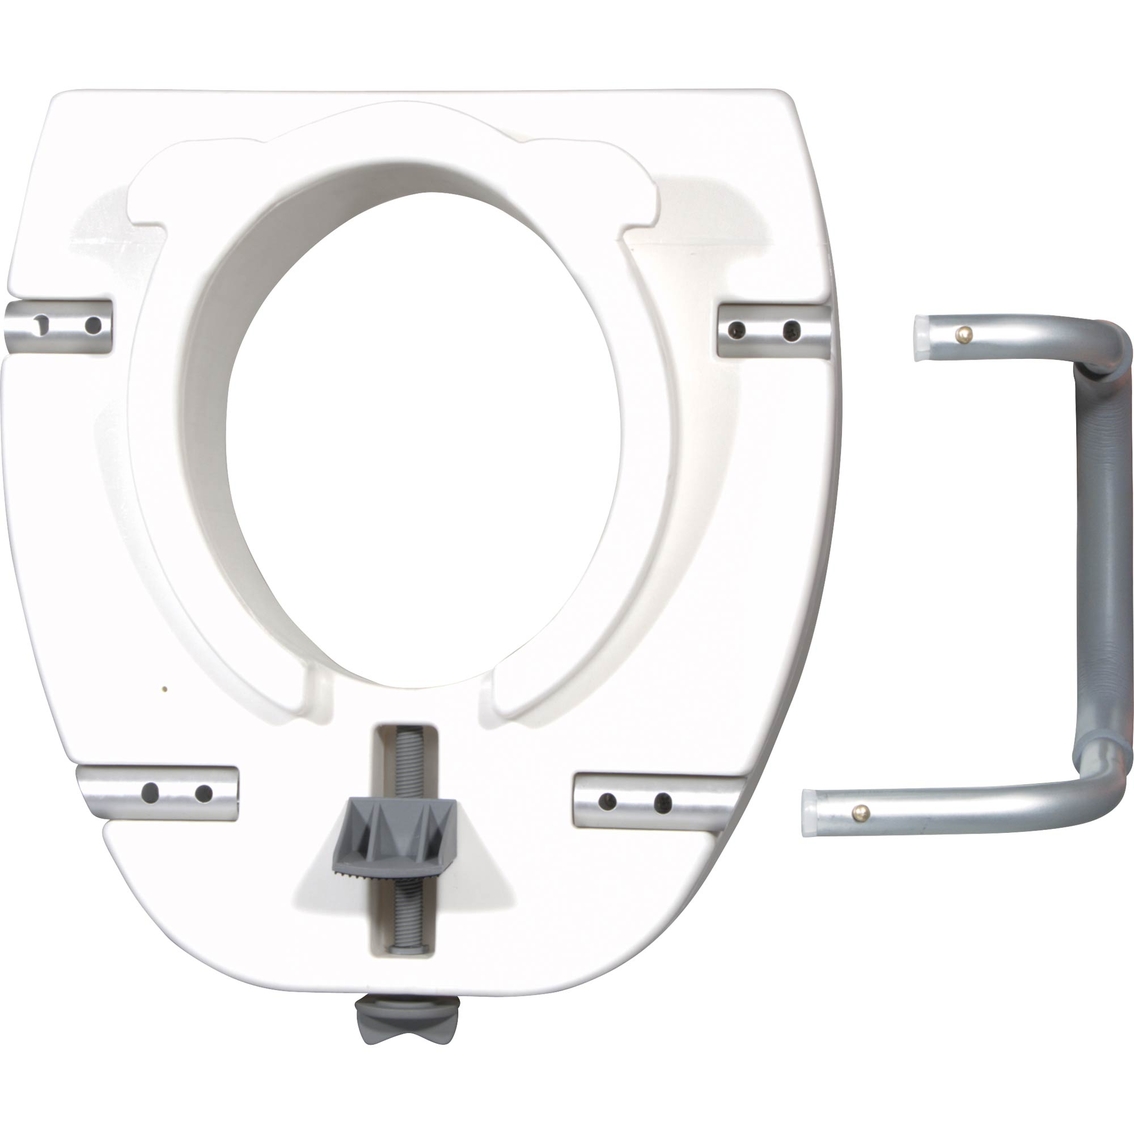 Drive Medical Premium Plastic Raised Toilet Seat with Lock and Padded Armrests - Image 2 of 3